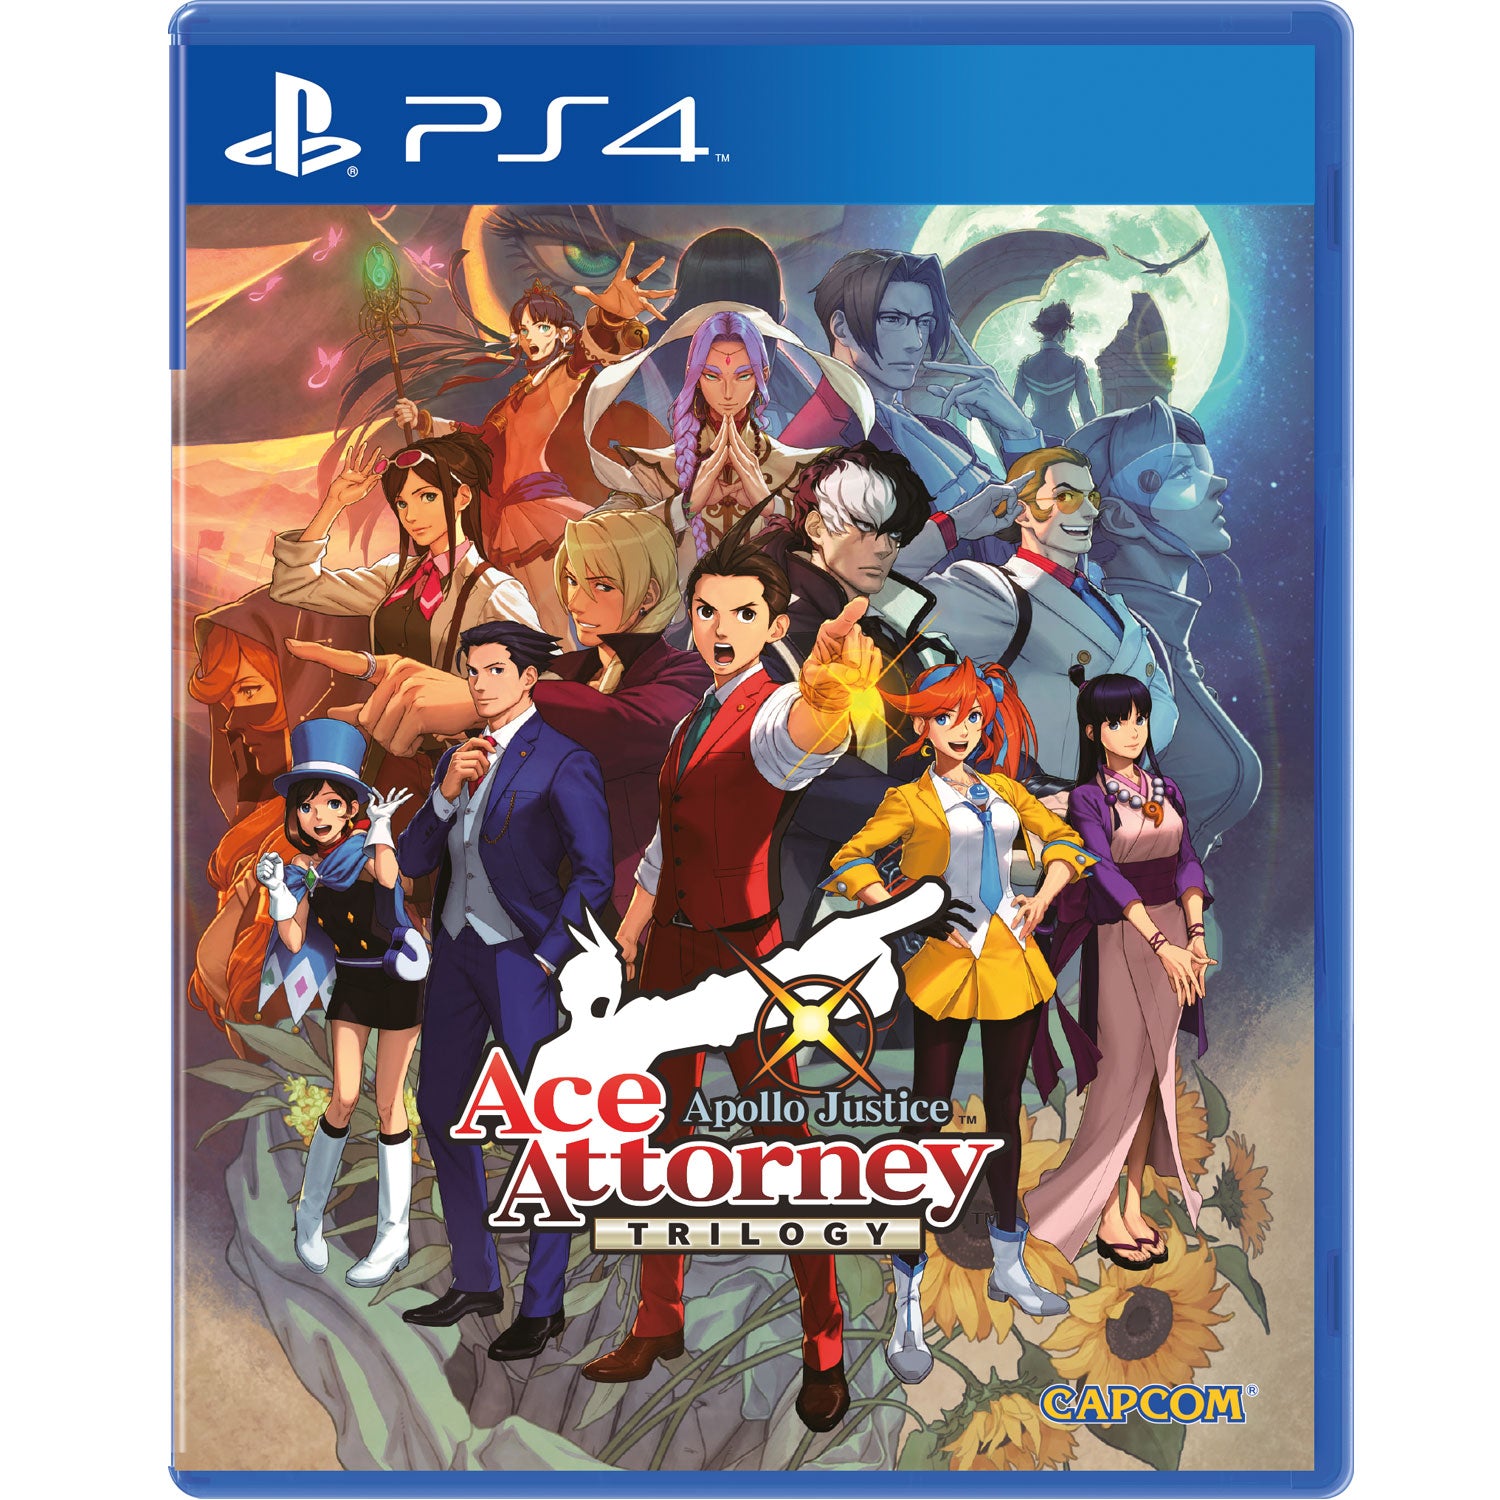 PS4 Apollo Justice Ace Attorney Trilogy